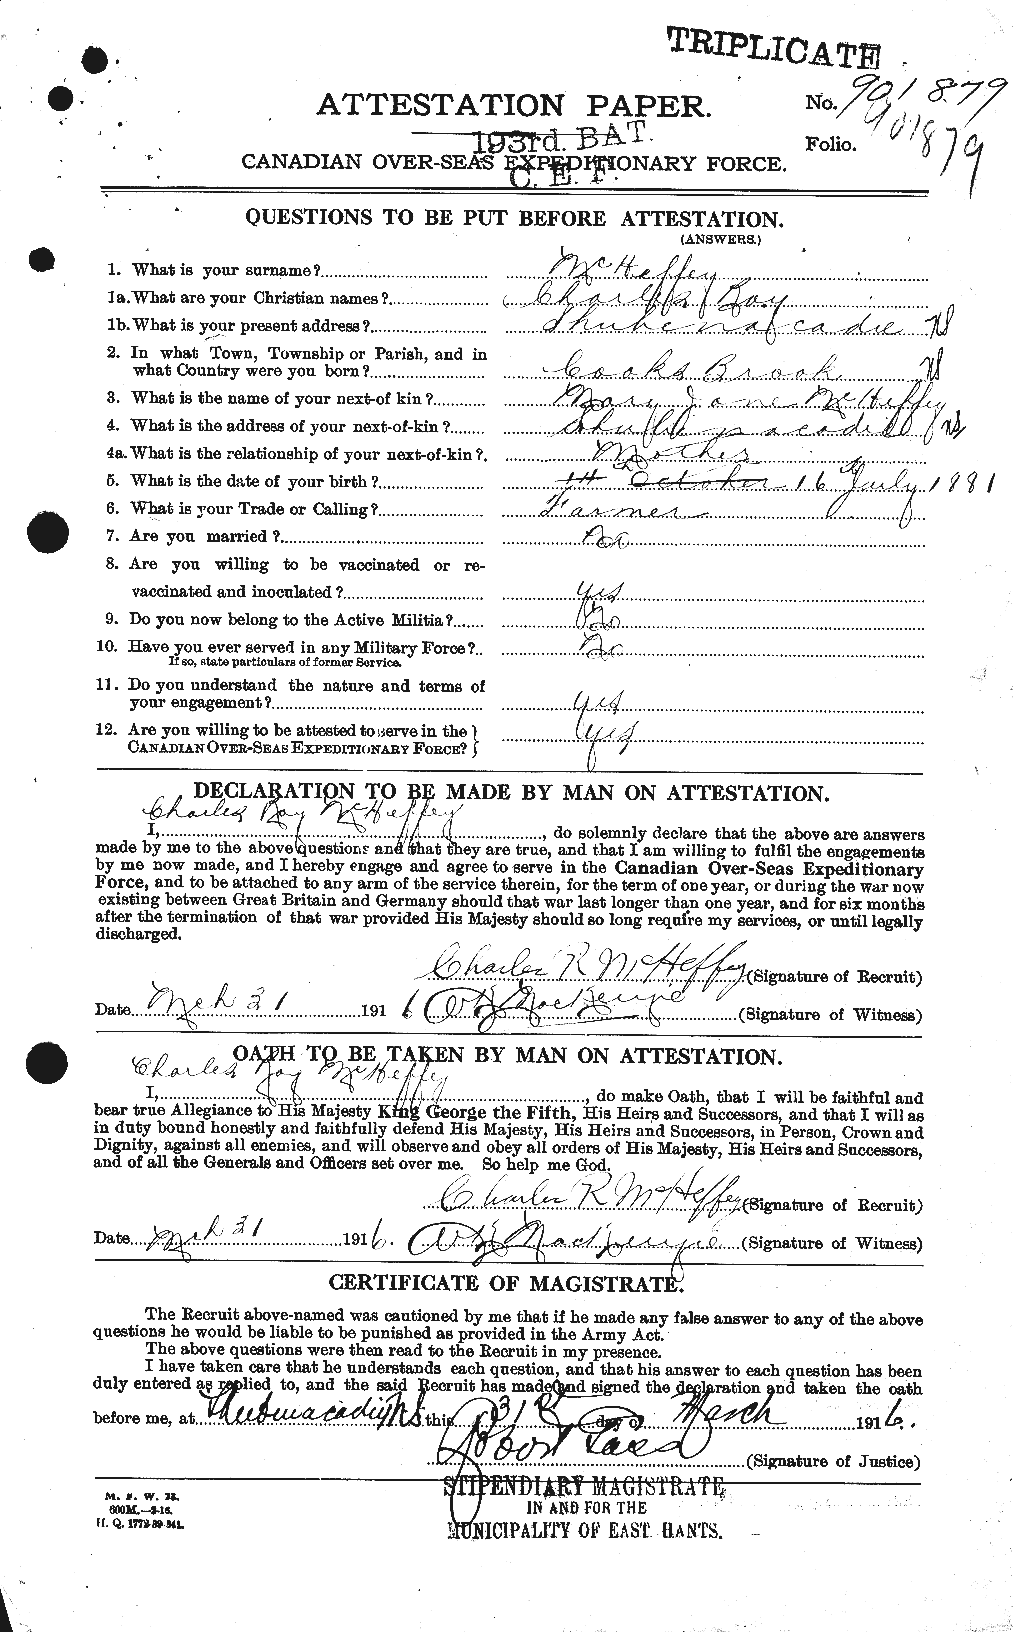 Personnel Records of the First World War - CEF 524277a